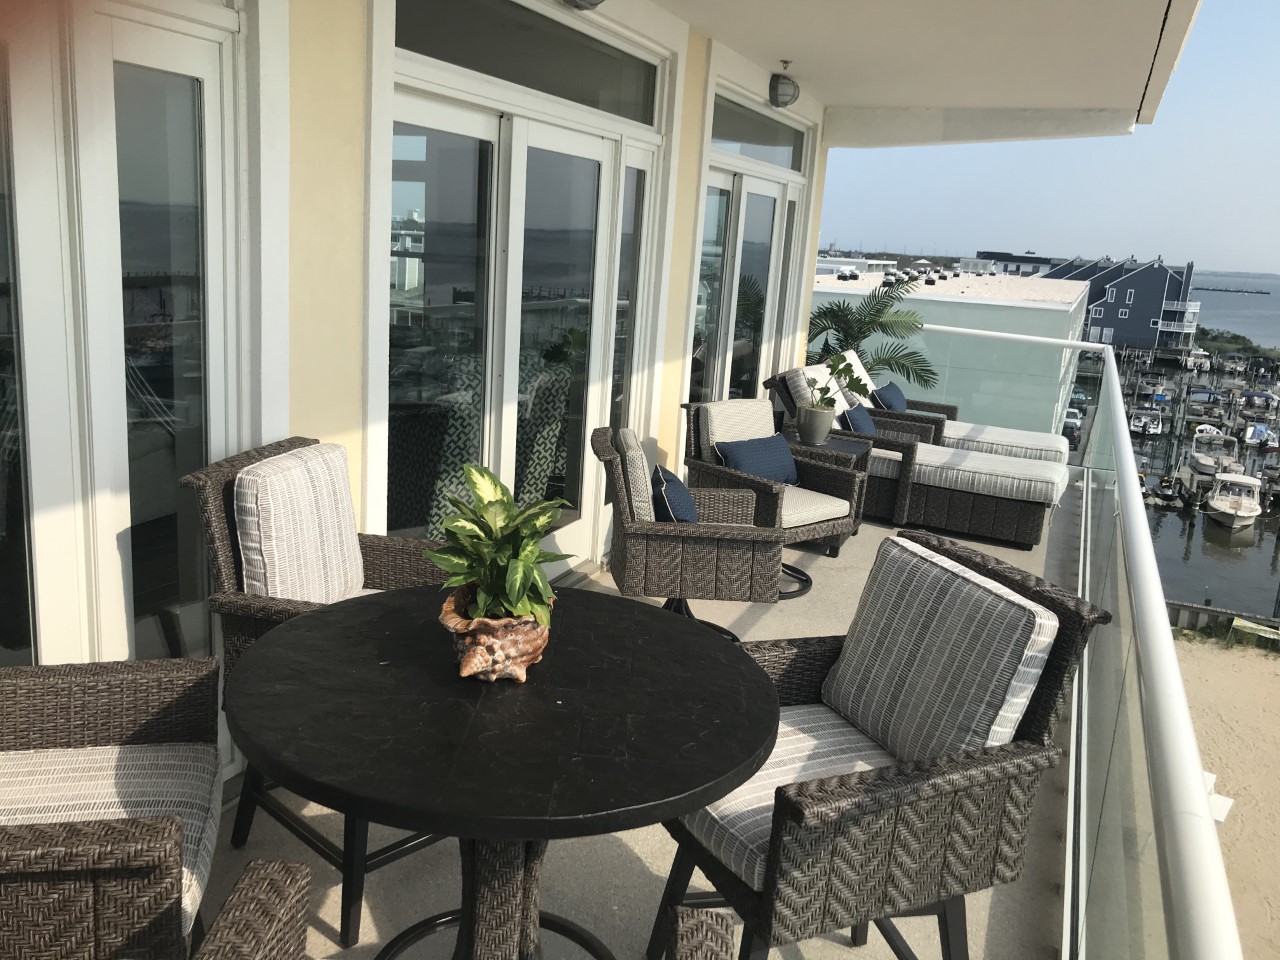 a table and chairs on a balcony overlooking the water